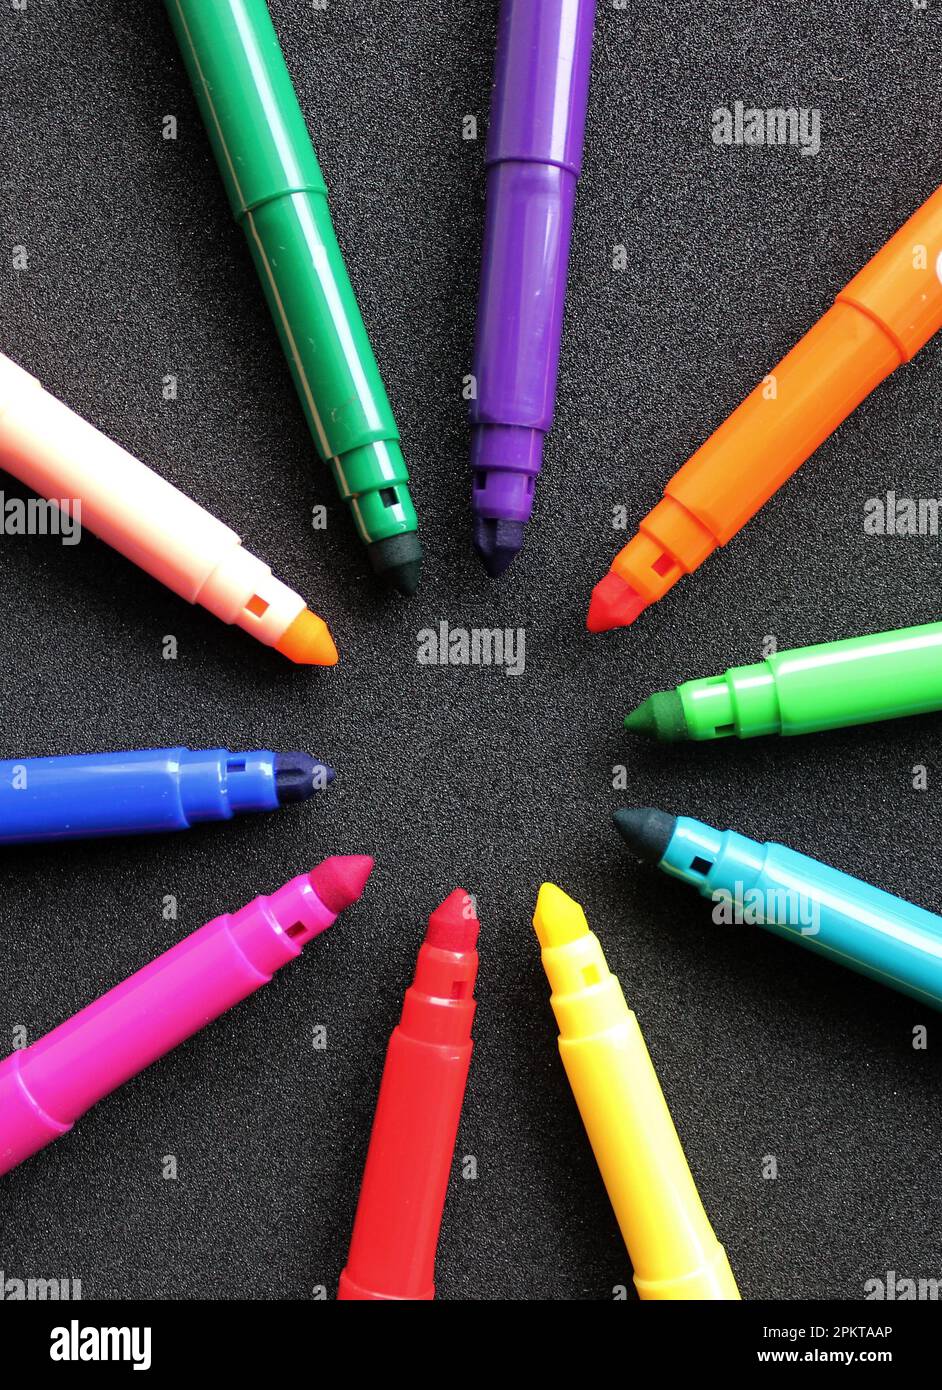 https://c8.alamy.com/comp/2PKTAAP/open-felt-tip-pens-of-different-colors-in-the-shape-of-a-star-lie-on-a-black-background-vertical-photo-2PKTAAP.jpg